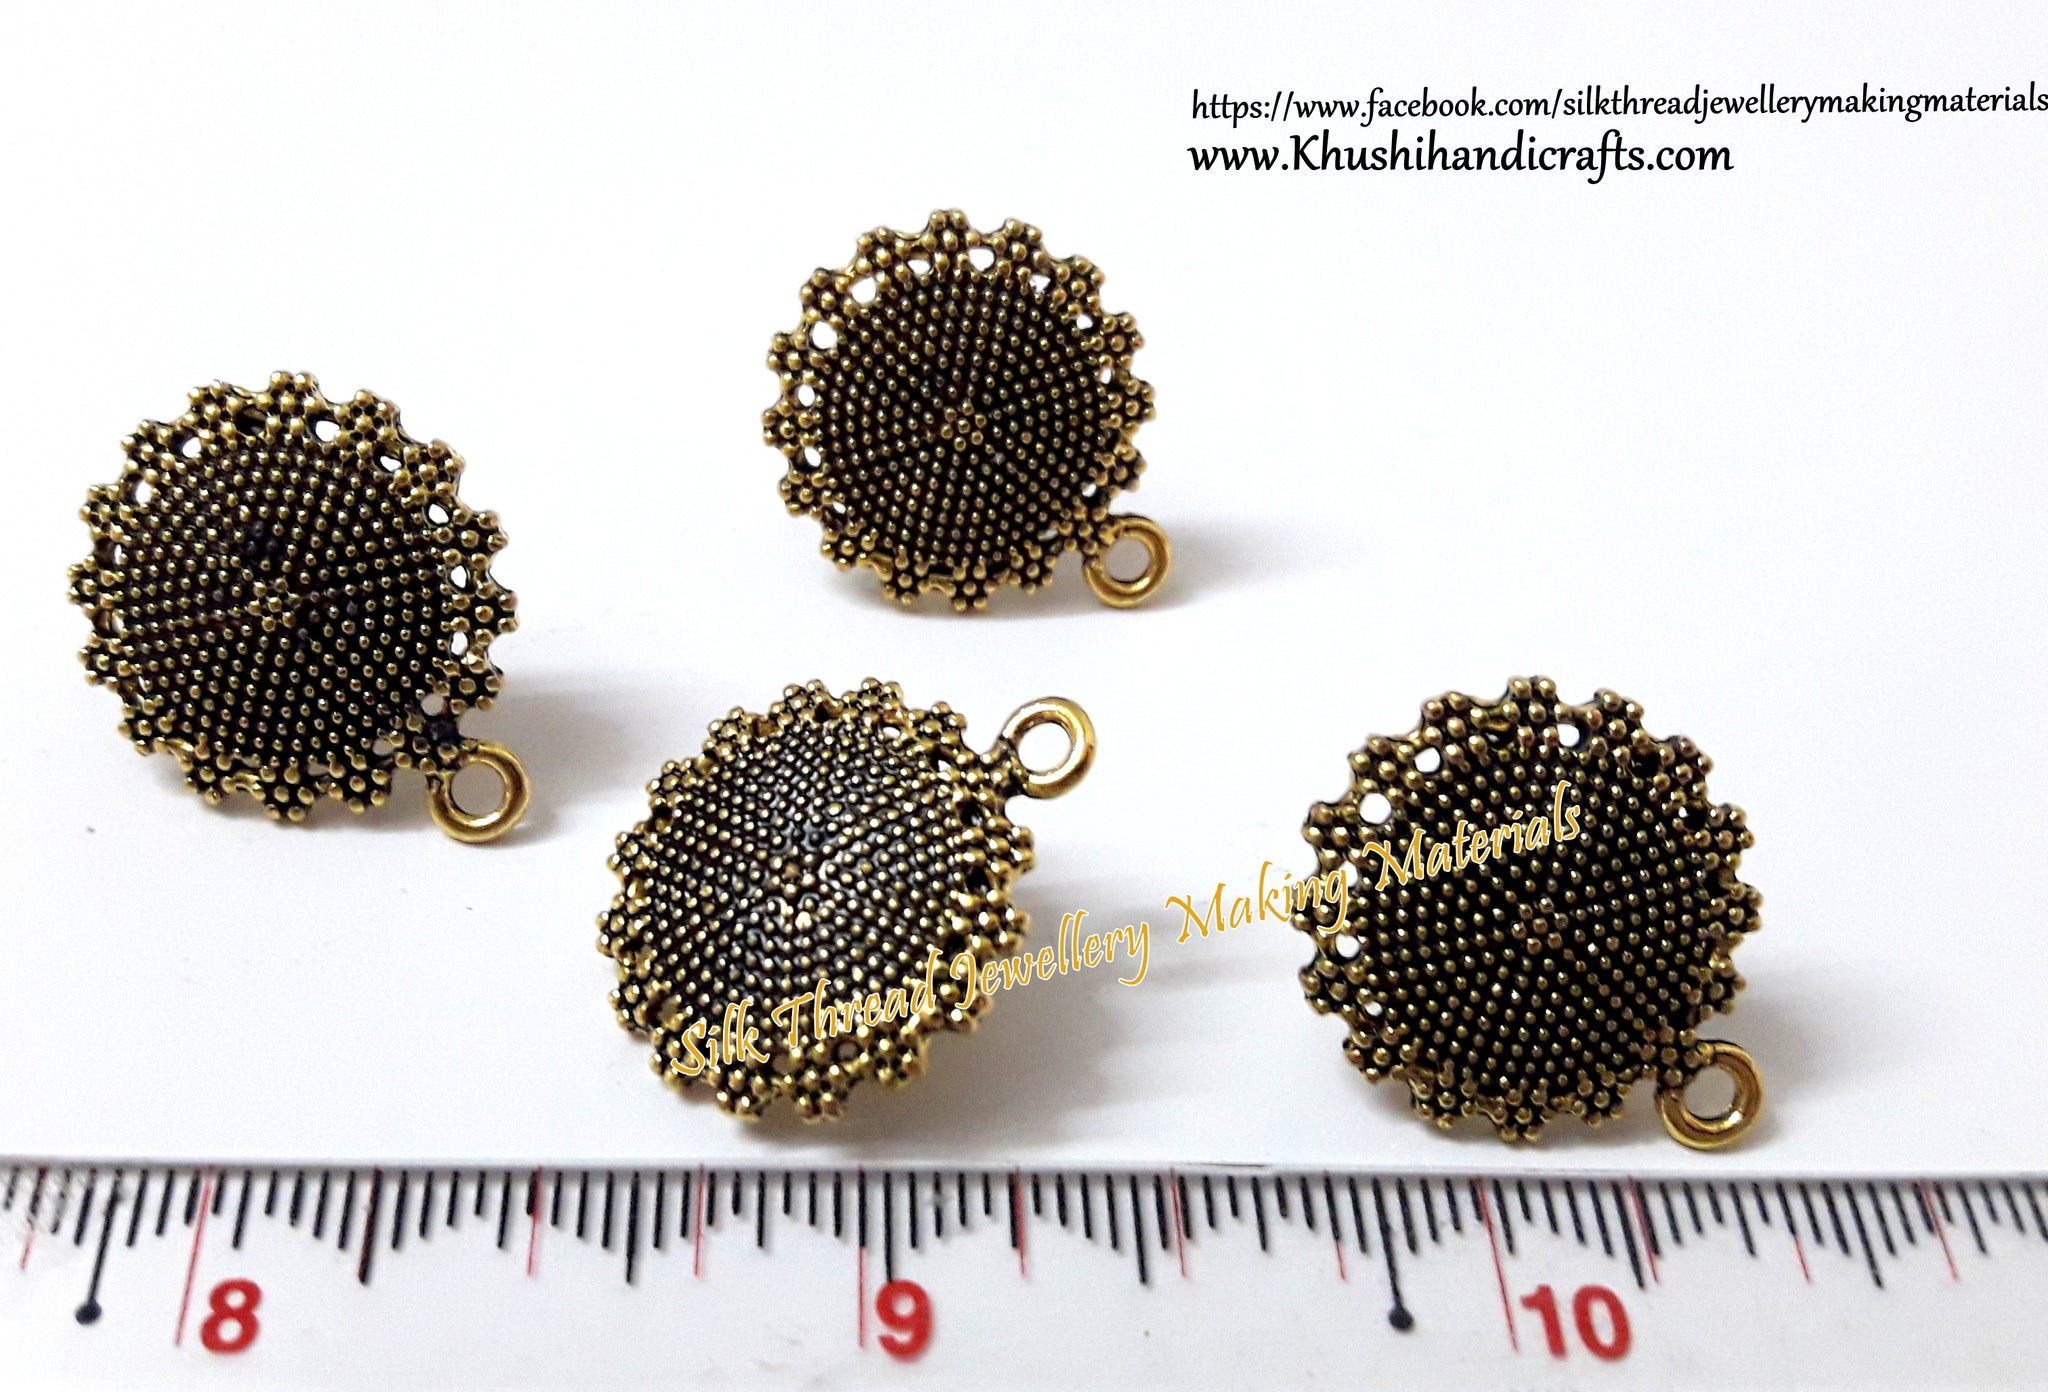 Antique studs for Jewelry Making